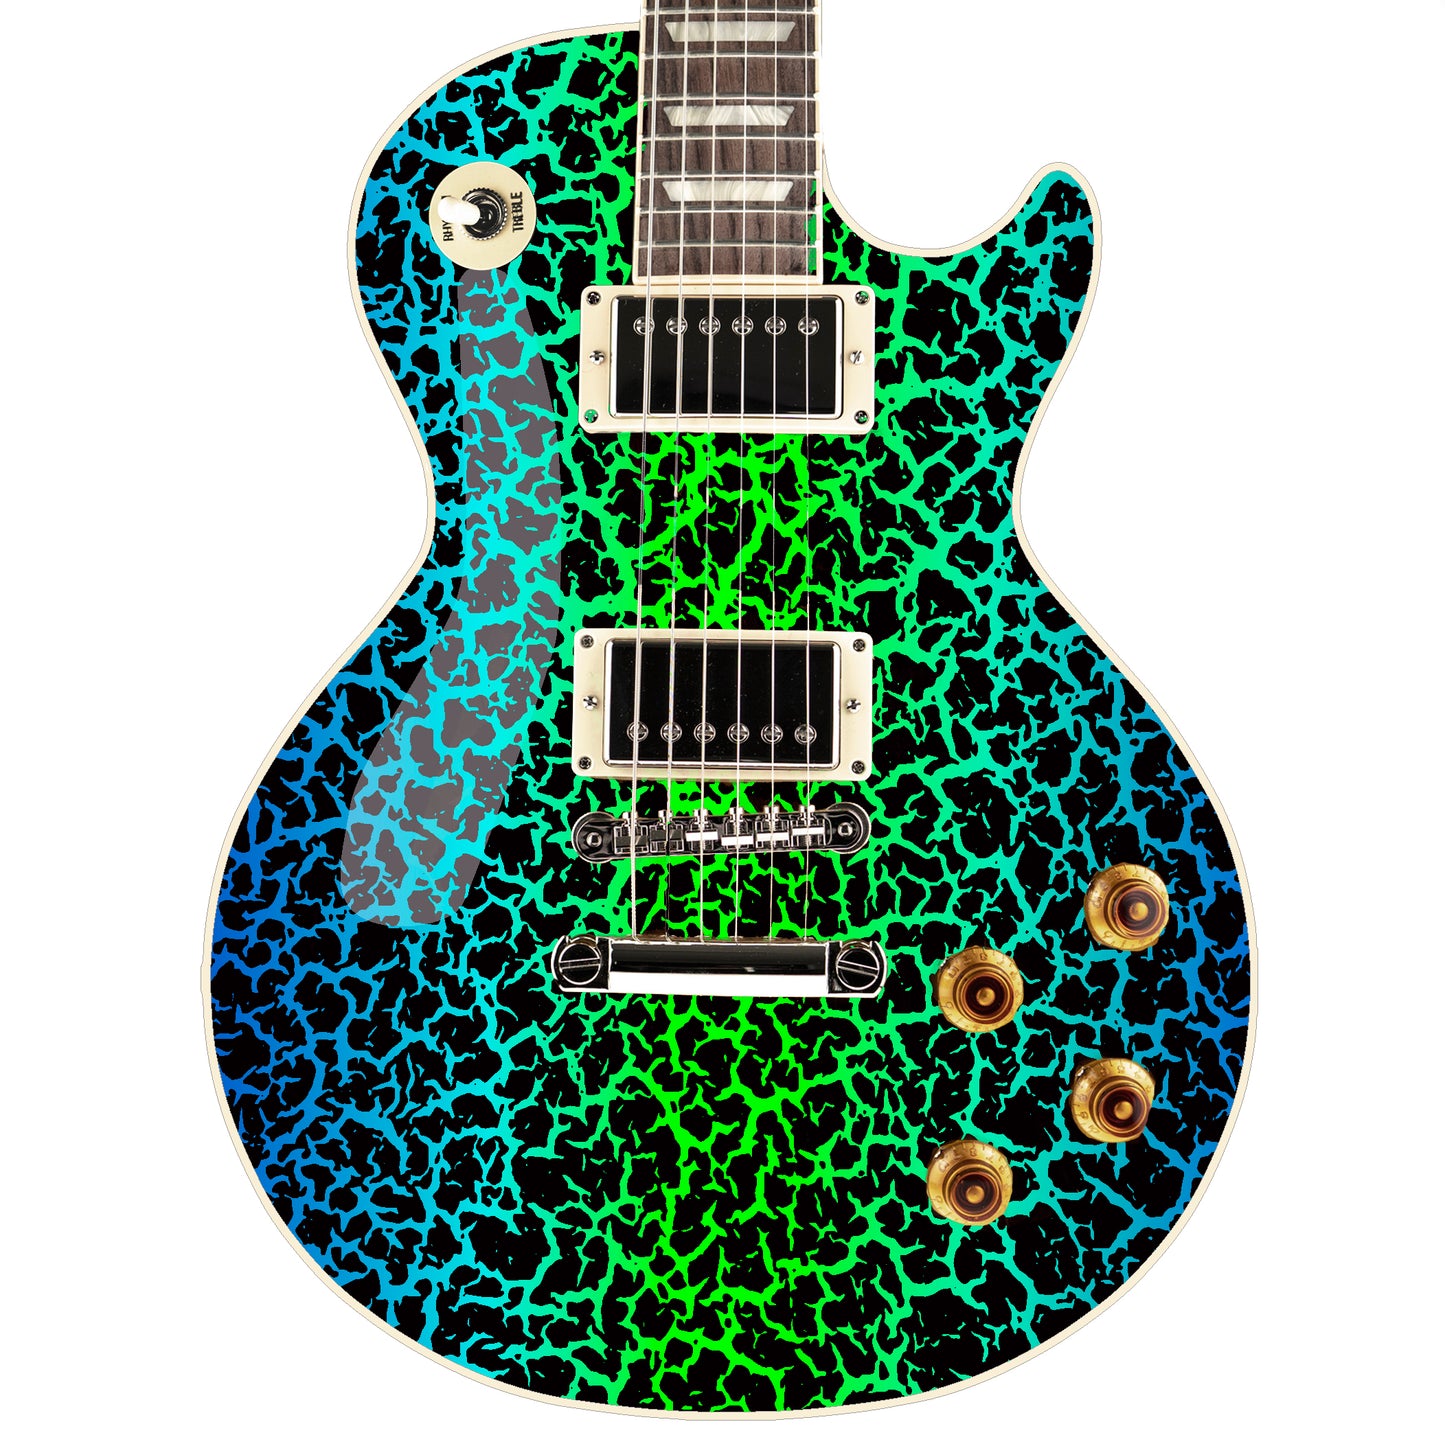 80's Metal Crackle Paint Selection Guitar/Bass Skin Wrap Sticker Skin. Slime Line GS210